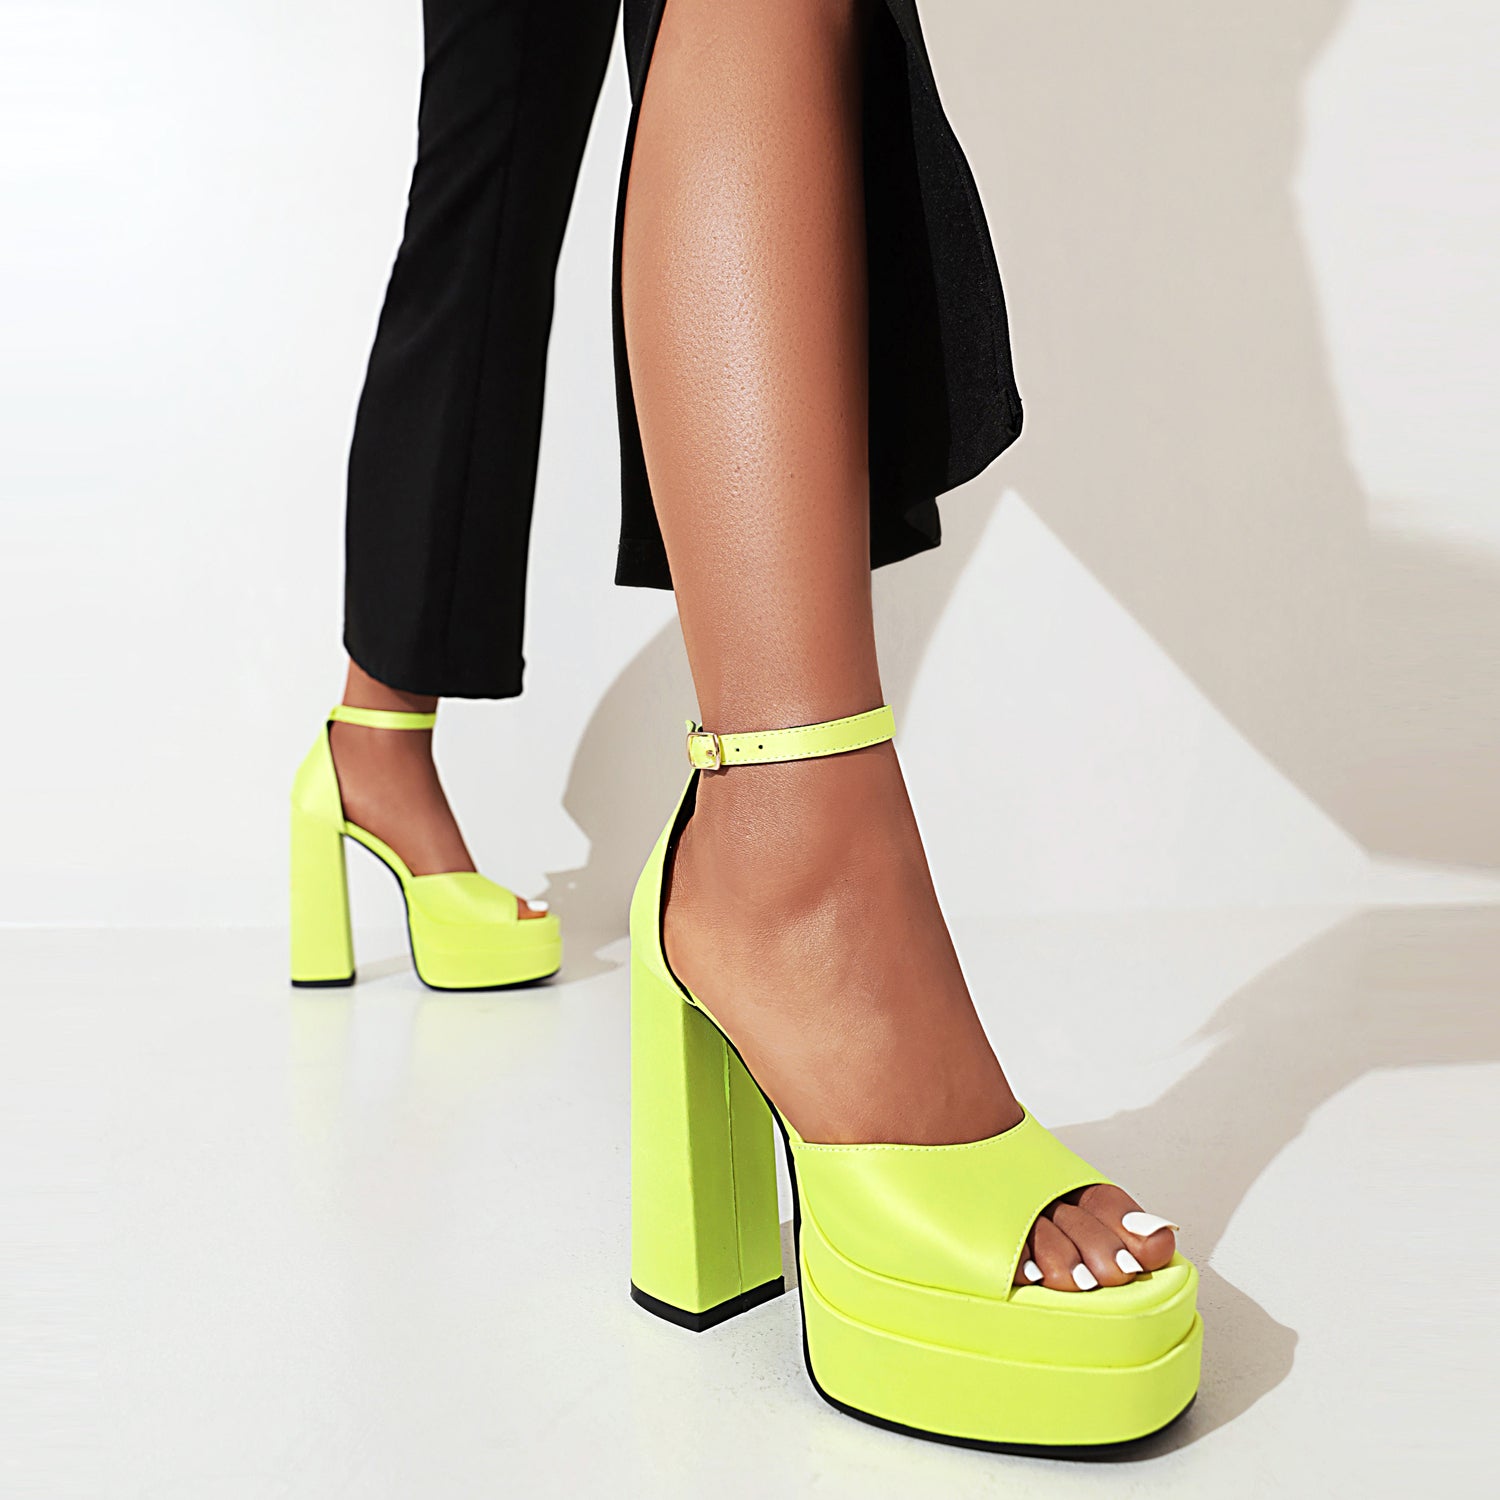 the Sexy Platform Ankle Strap Open Toe Sandals-Yellow best platform sandals are from bigsizeheels